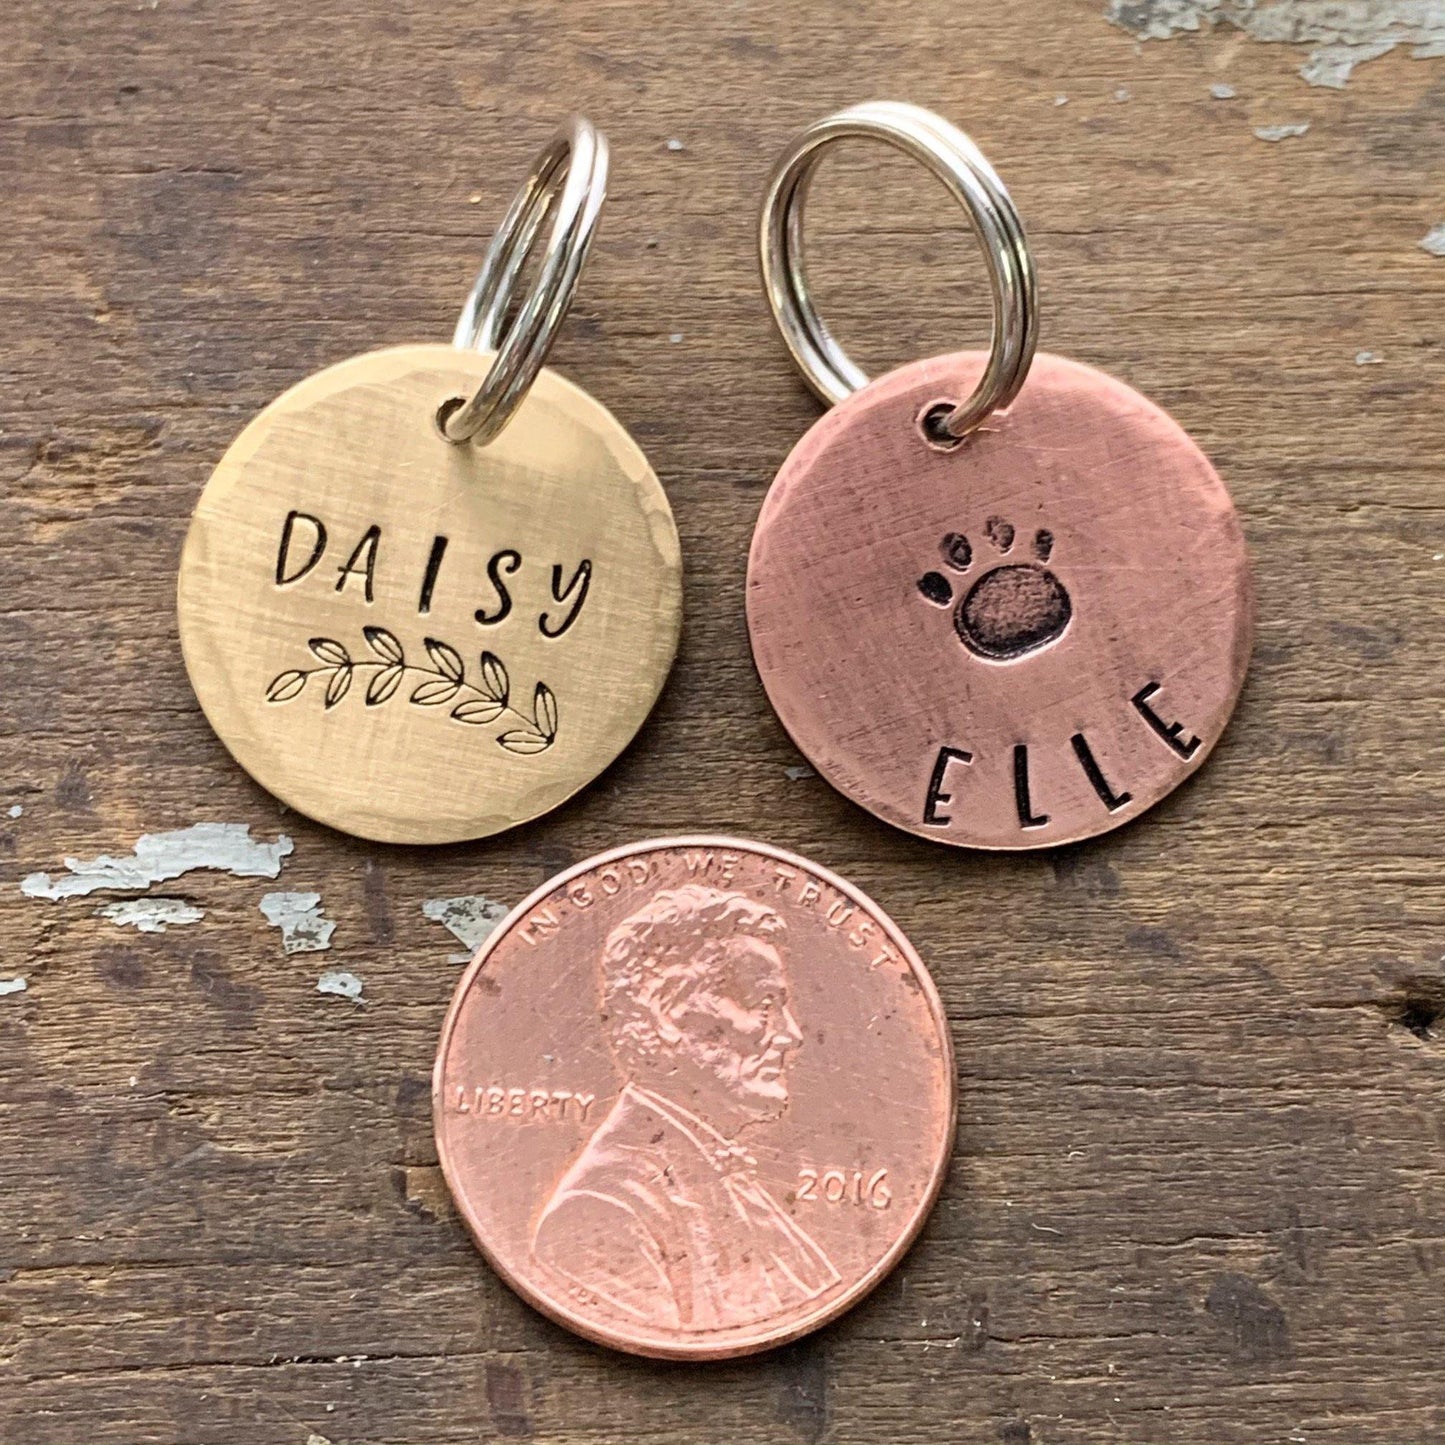 Small Copper Paw Print Pet Tag for Dog or Cat - KyleeMae Designs